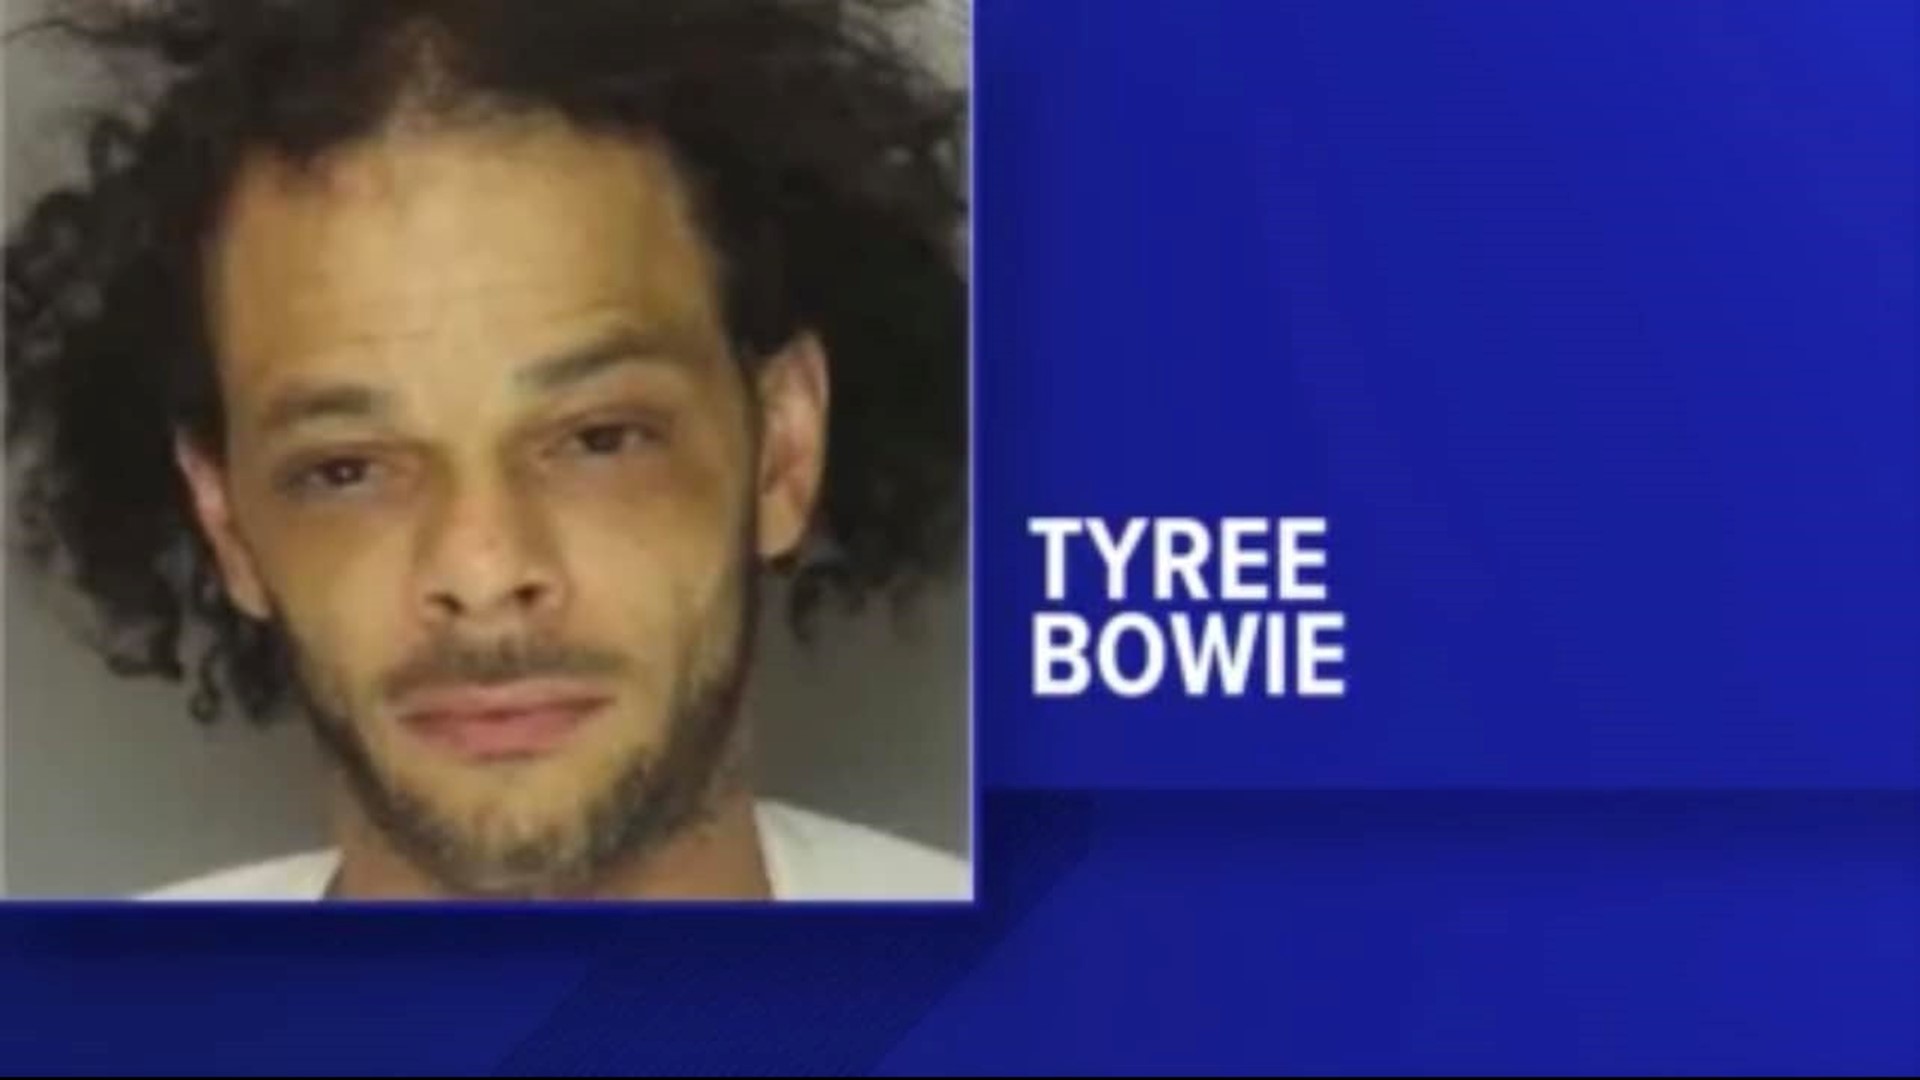 Jury selection in the trial of Tyree Marche'll Bowie, who is accused of killing two-year-old Dante Mullinix in 2018, will begin today at York County Judicial Center.